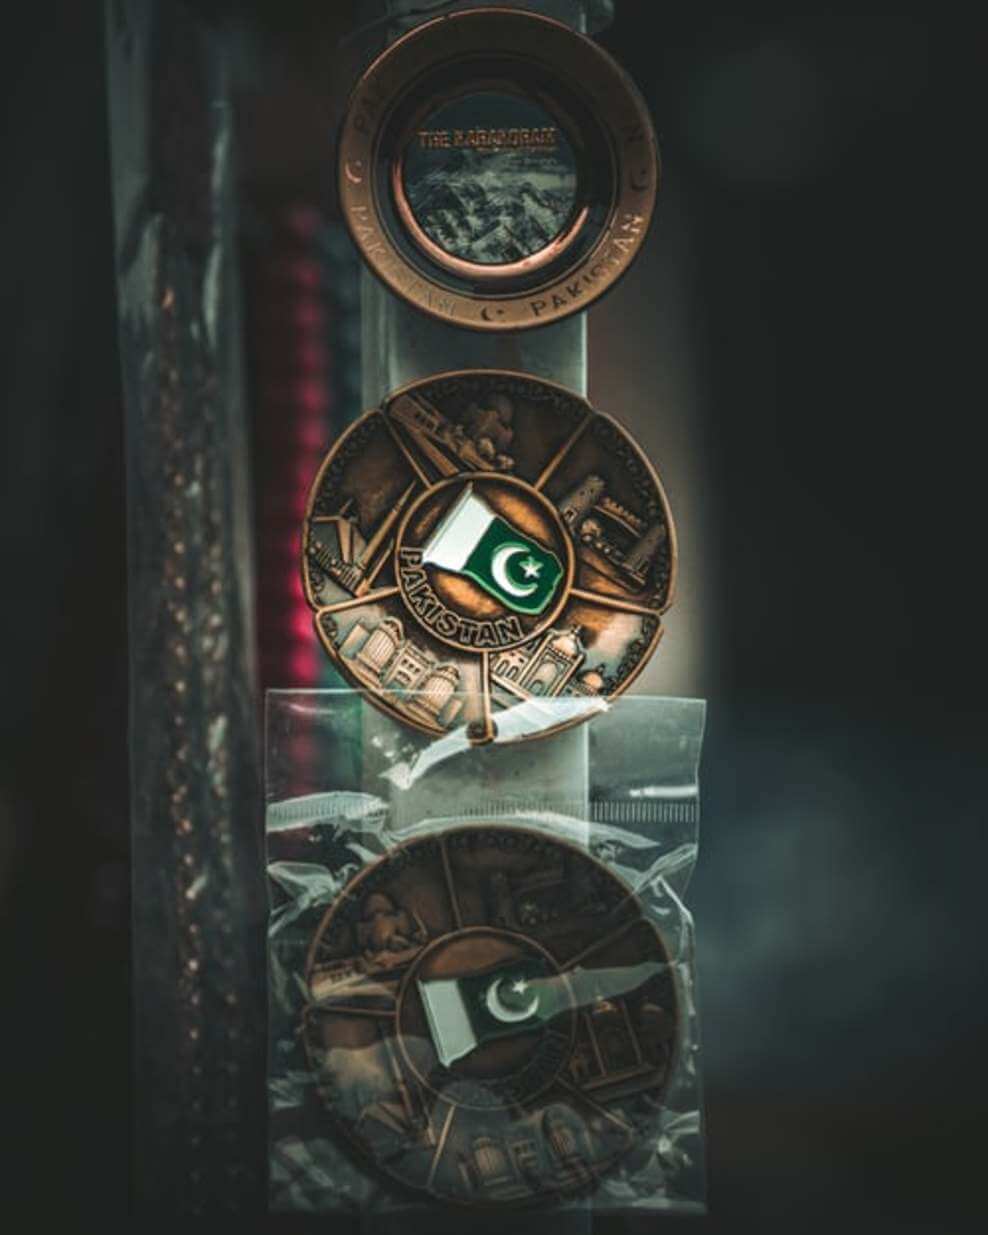 An image of Wall pieces having Pakistan's flag